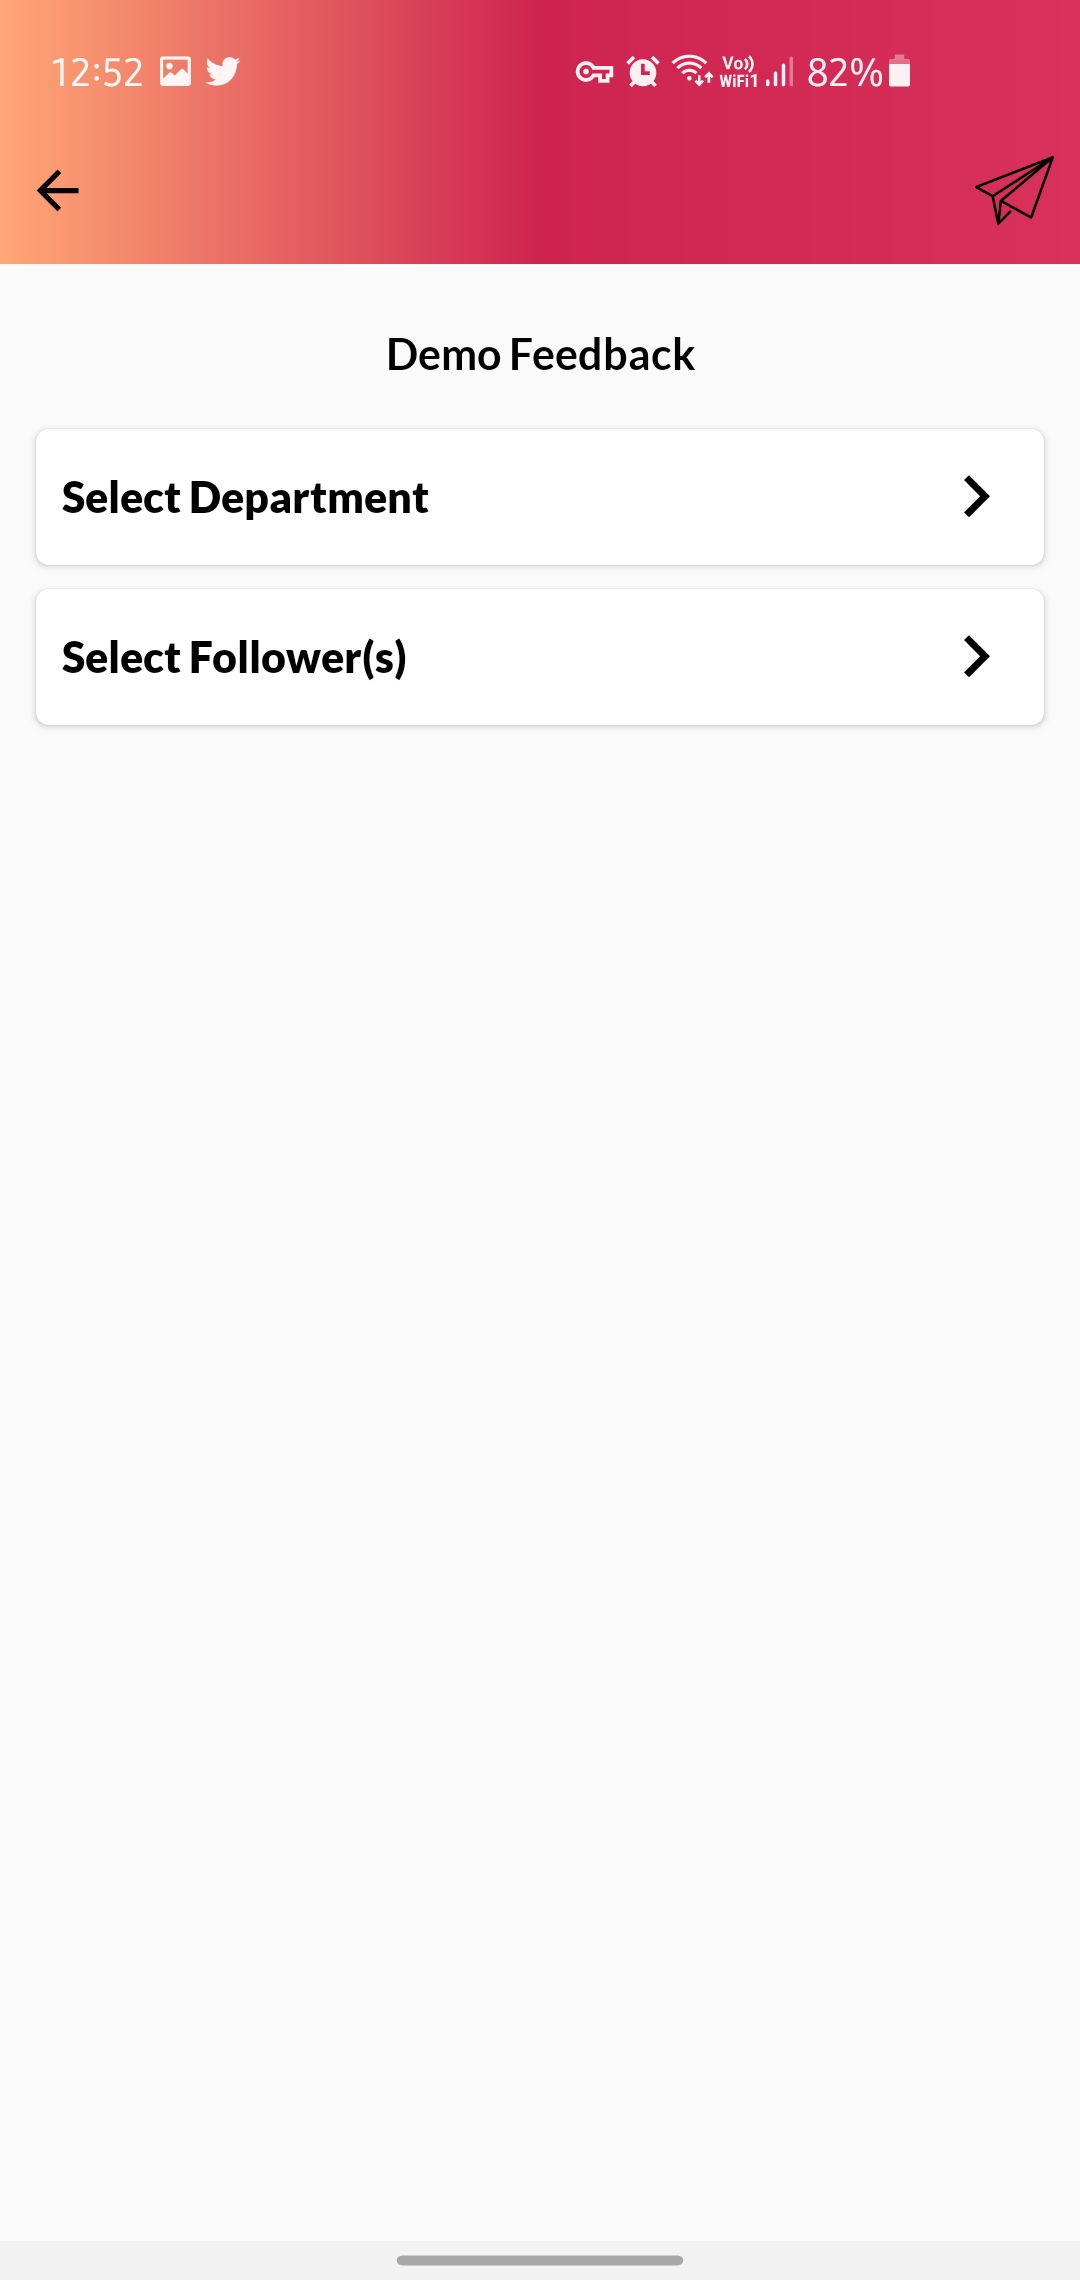 2.Select the Department and then tap on “Select Followers”.